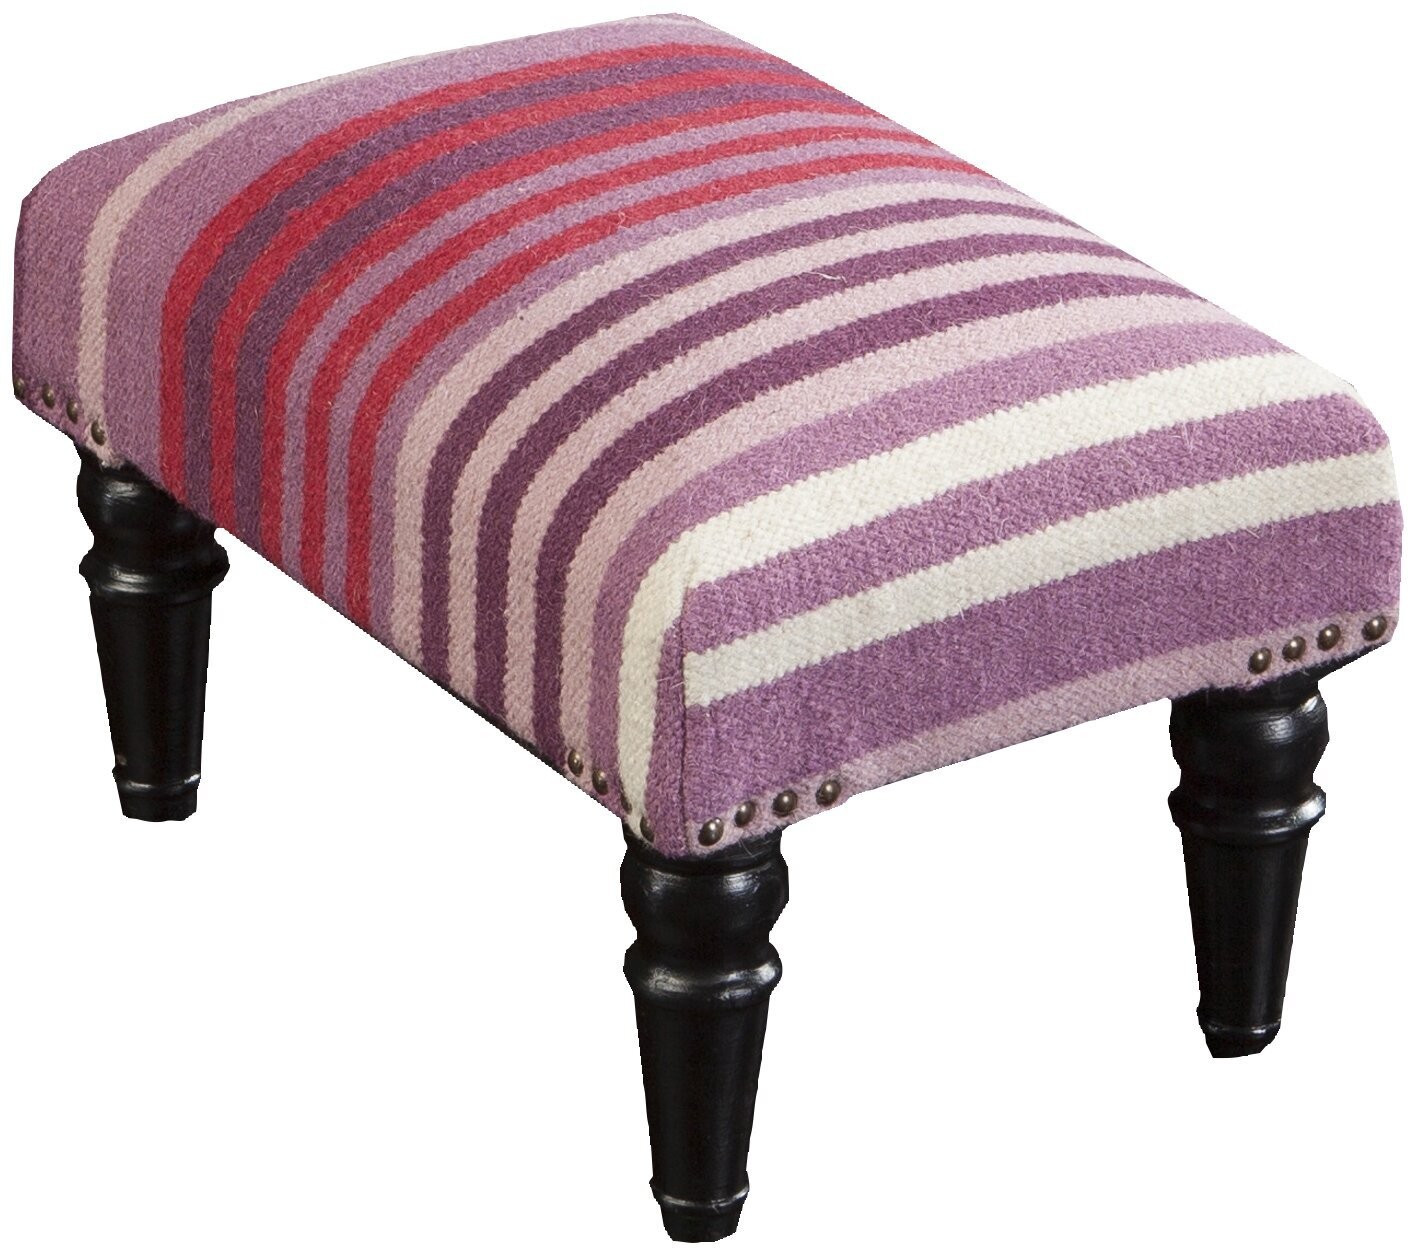 Small footstool with legs in a different material